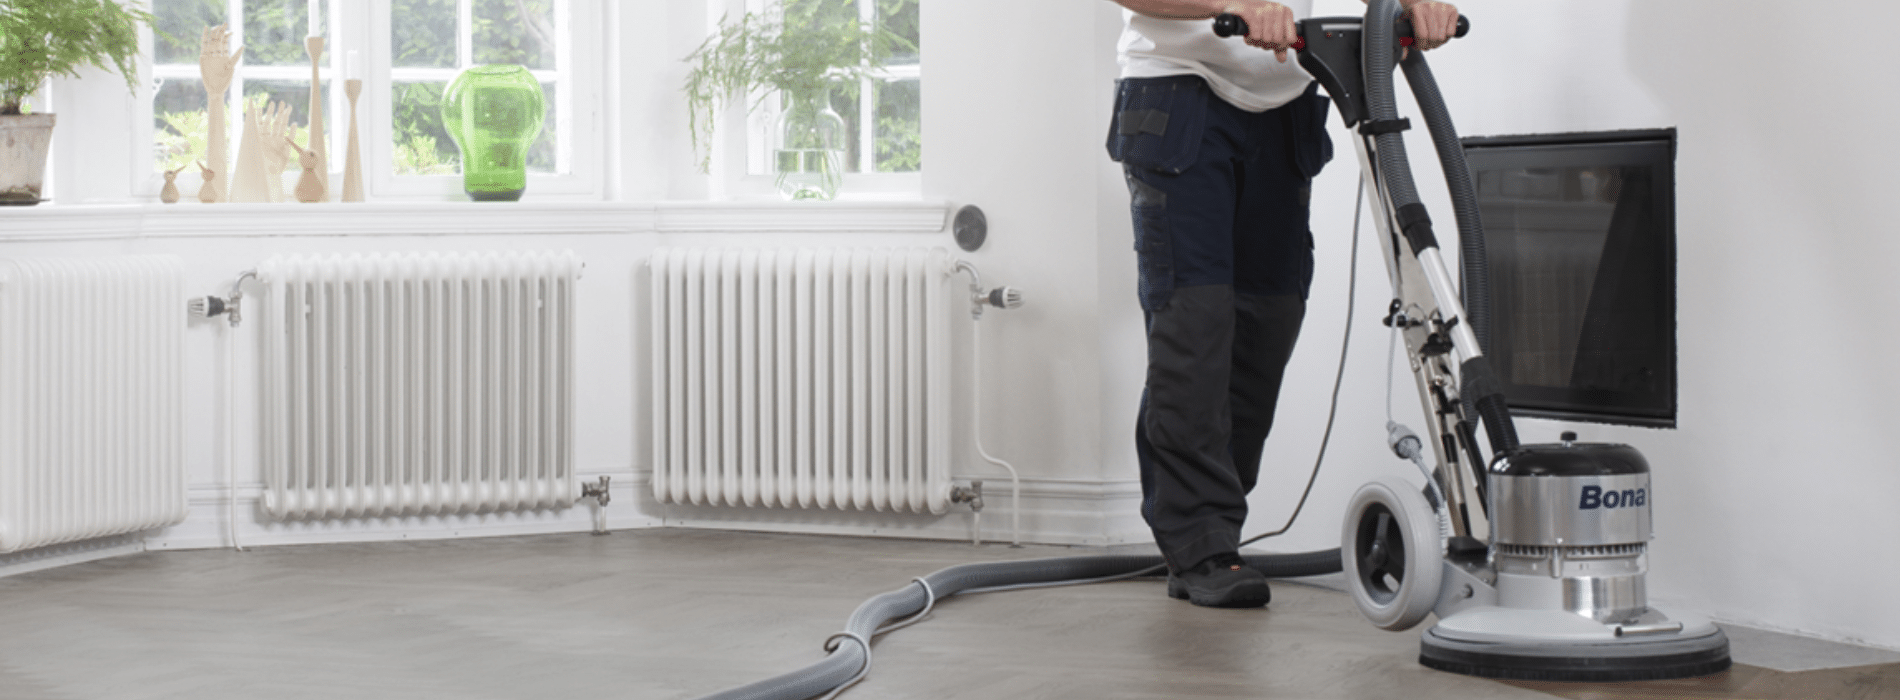 In Stanmore, HA7, Expert herringbone floor sanding with the powerful Effect 2200 belt sander. Dust-free process with HEPA filtered extraction system. Achieve stunning results on your 200x750 mm herringbone floor with Mr Sander®.